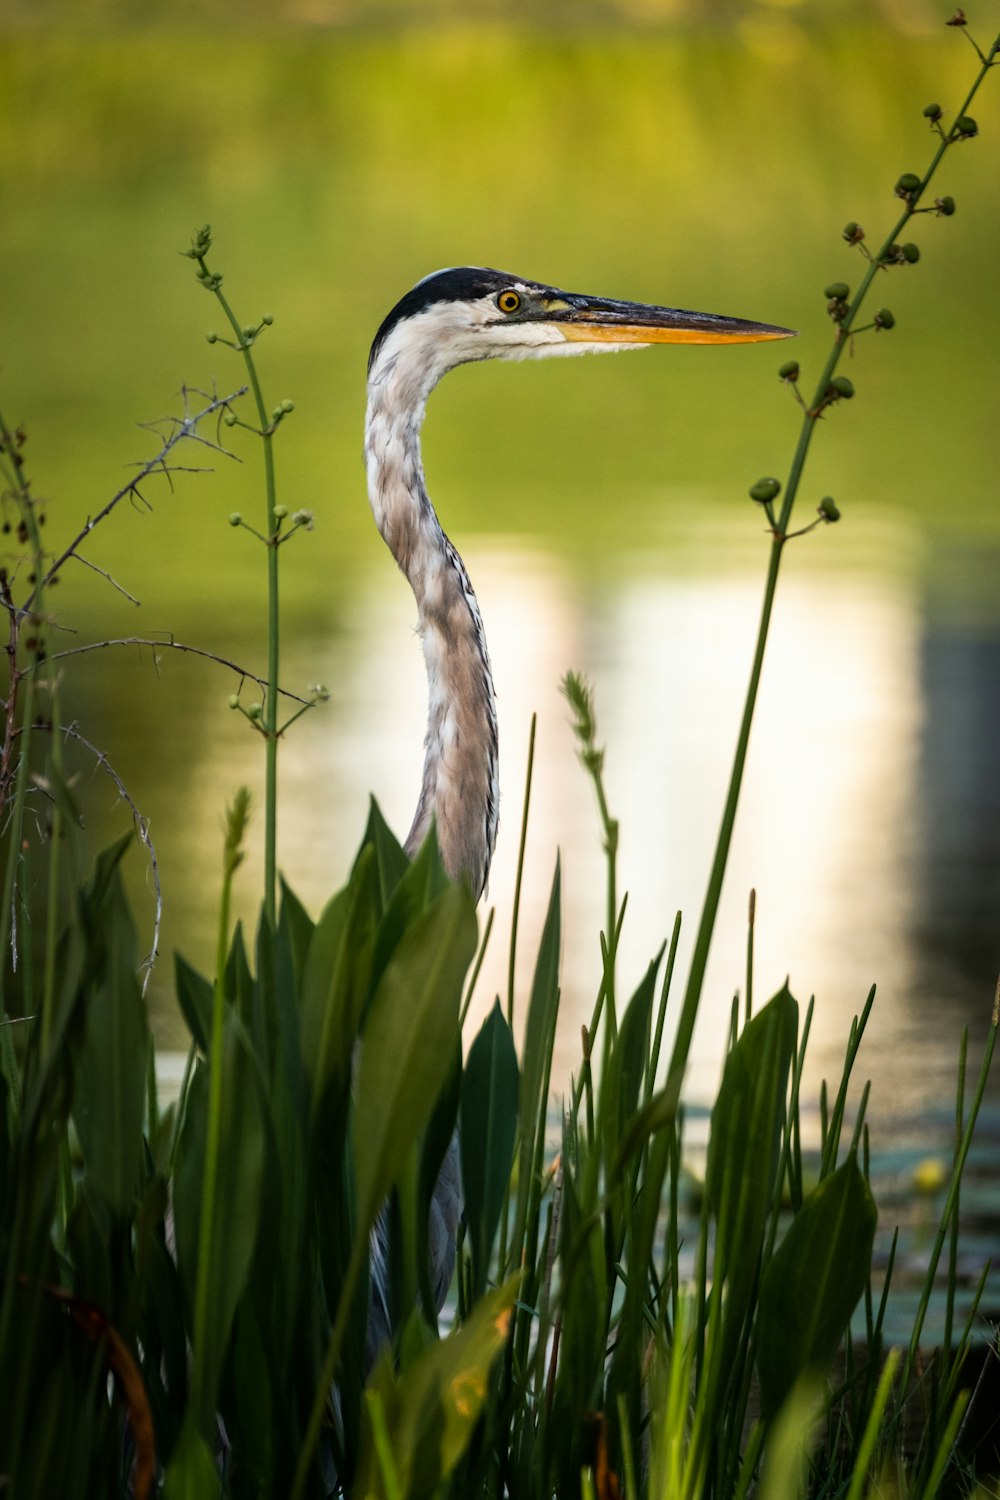 a bird with a long neck standing next to a body of water